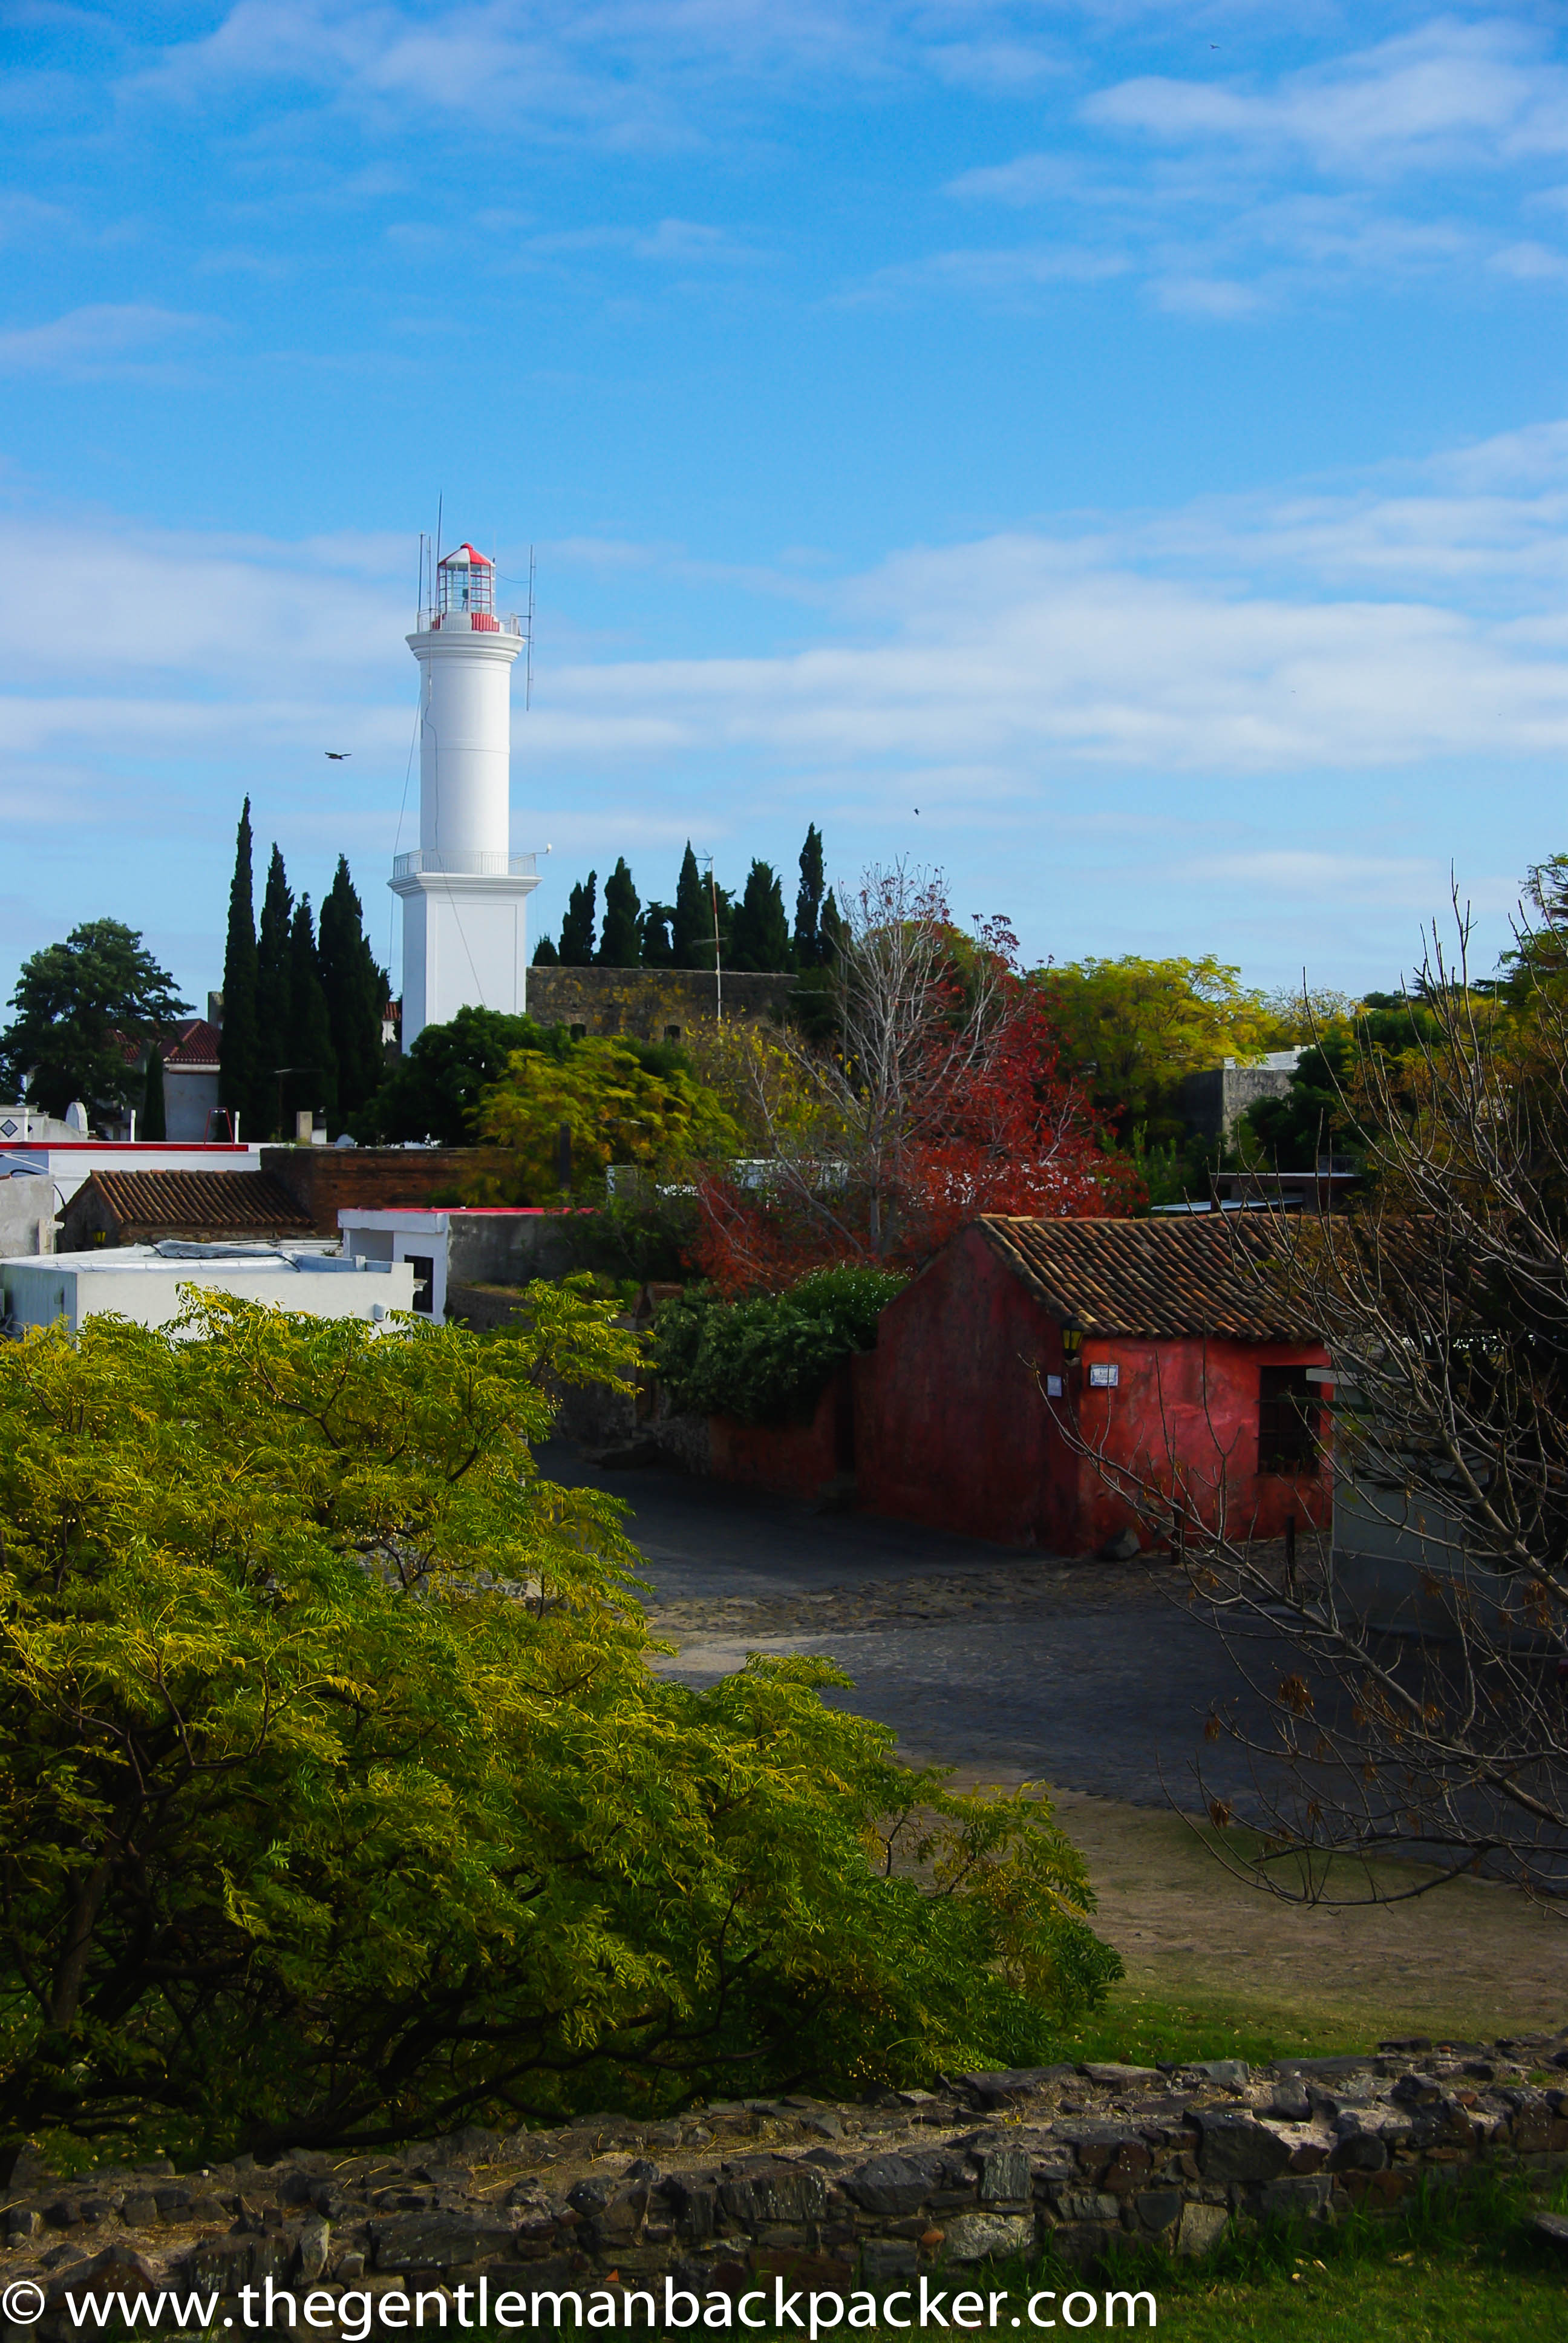 The lighthouse of Colonia. Note the red house in the middle.